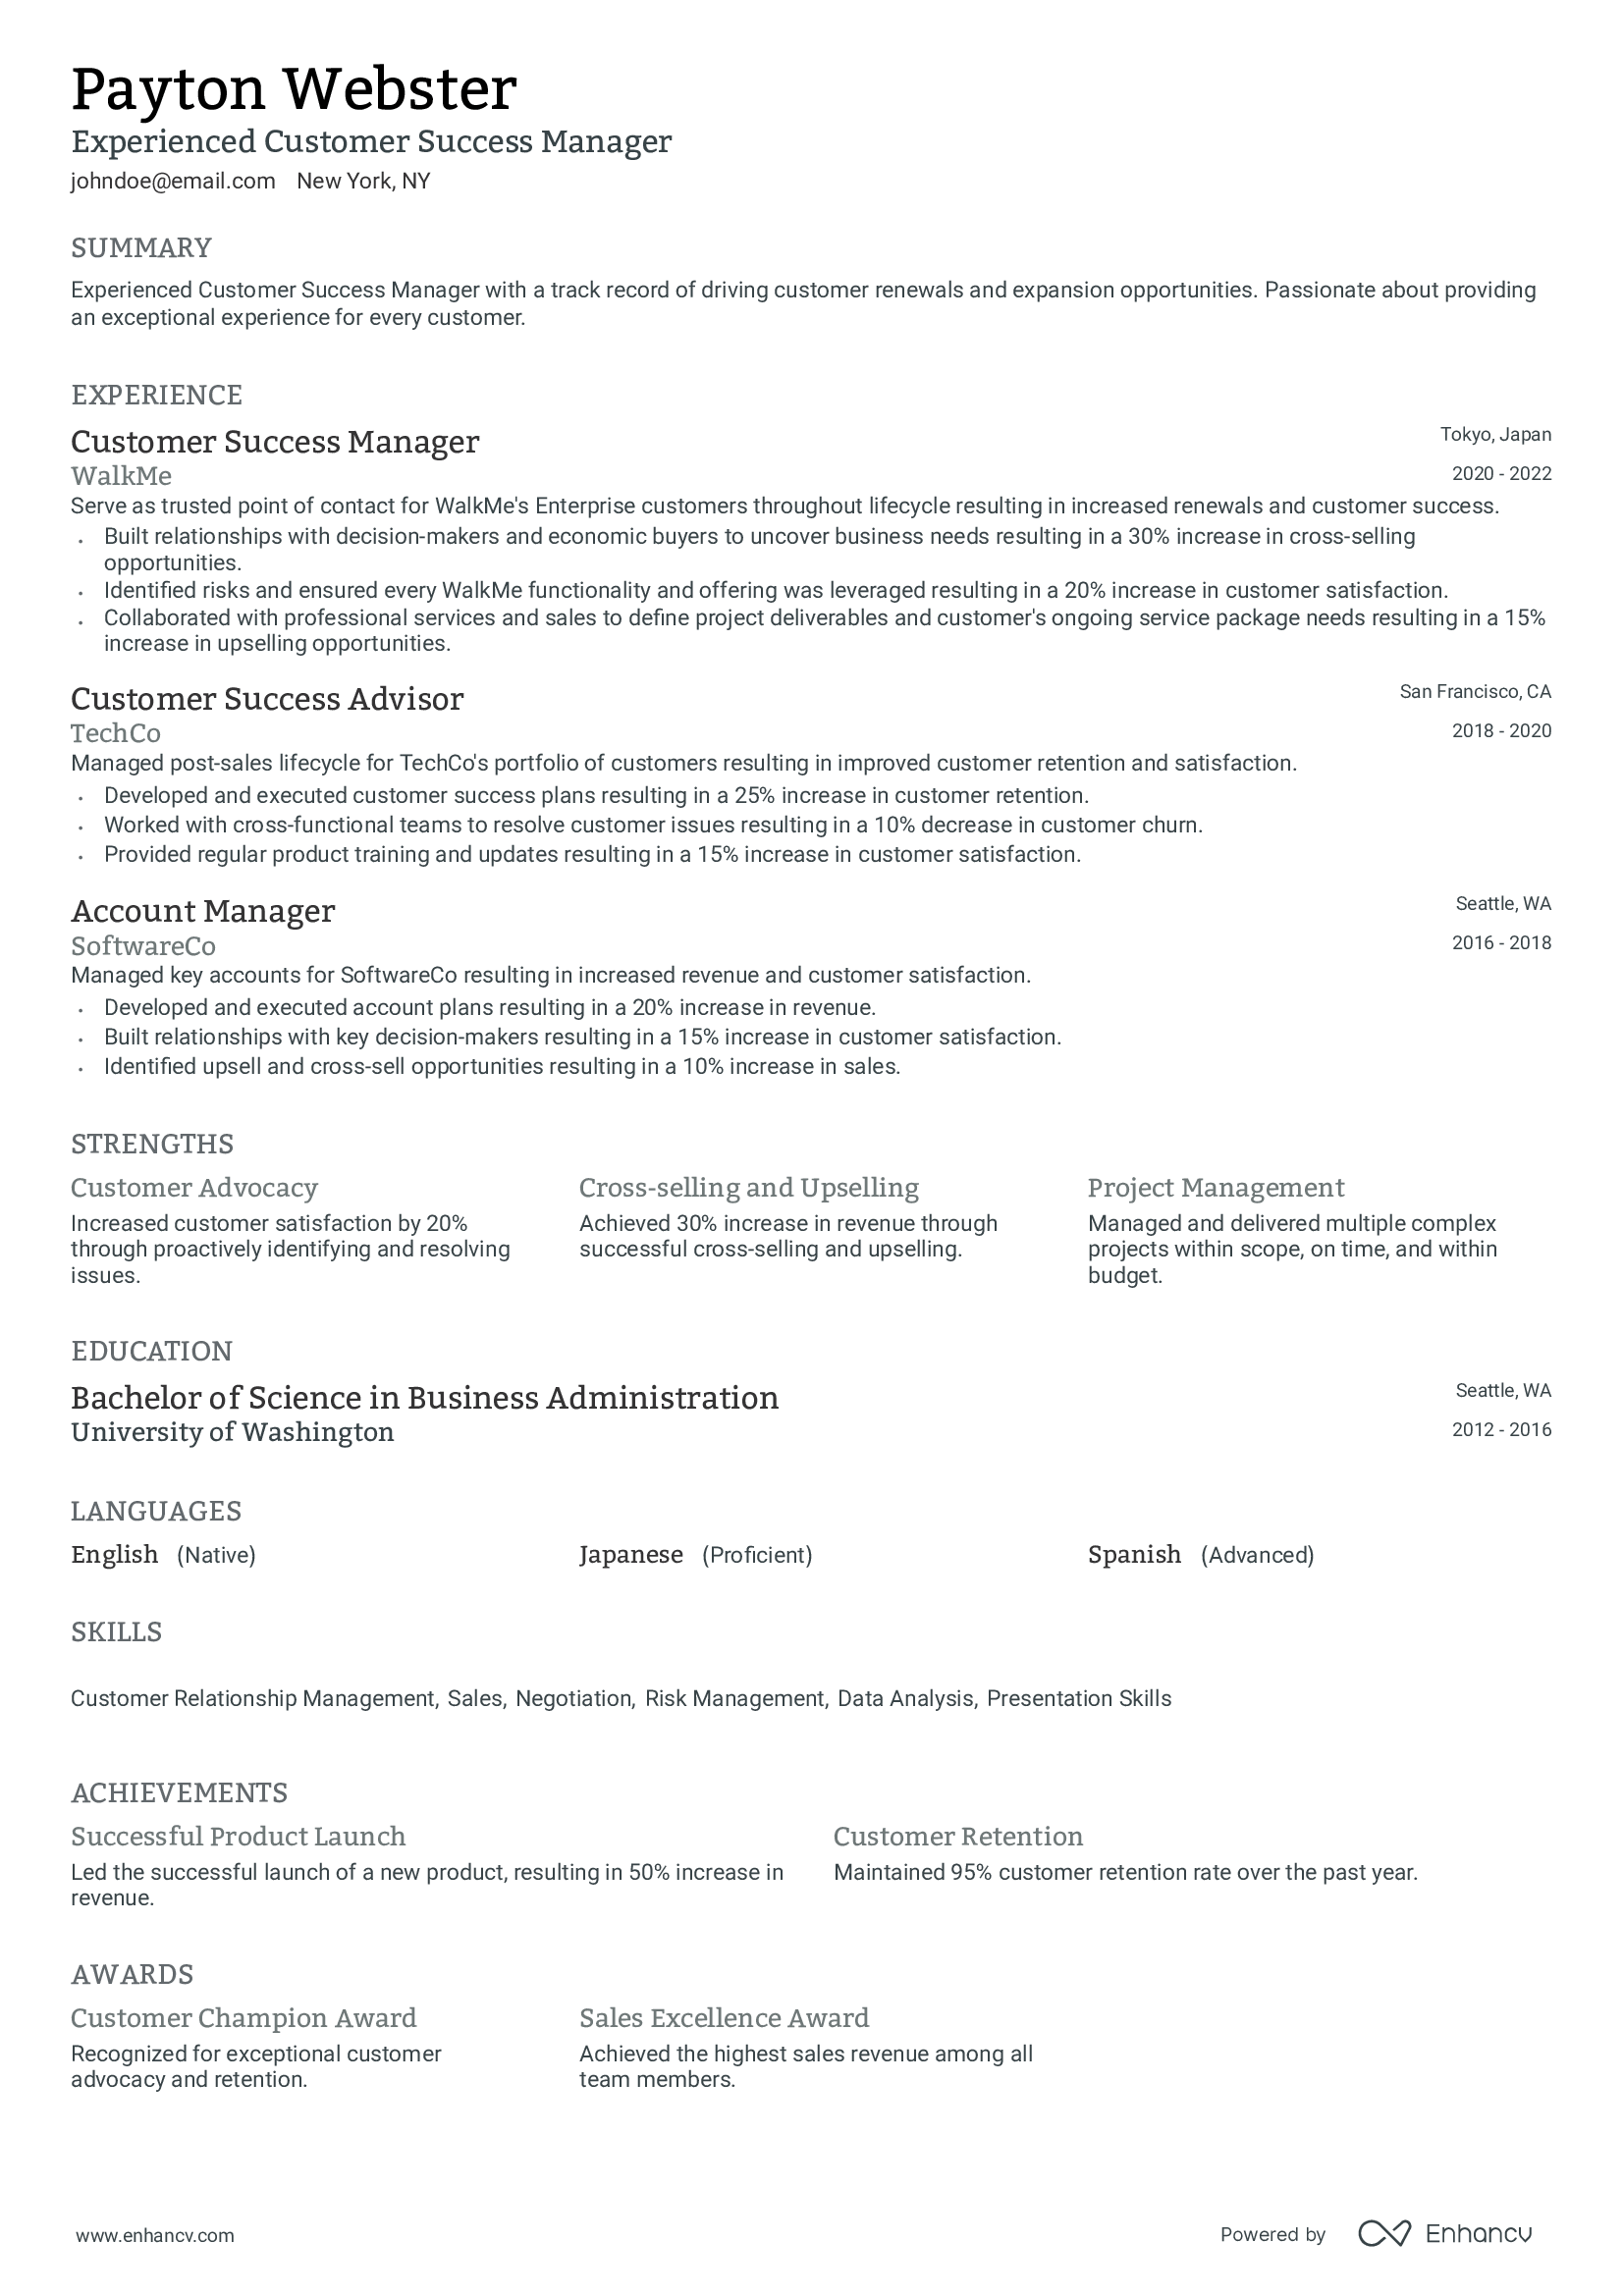 Experienced Customer Success Manager resume example